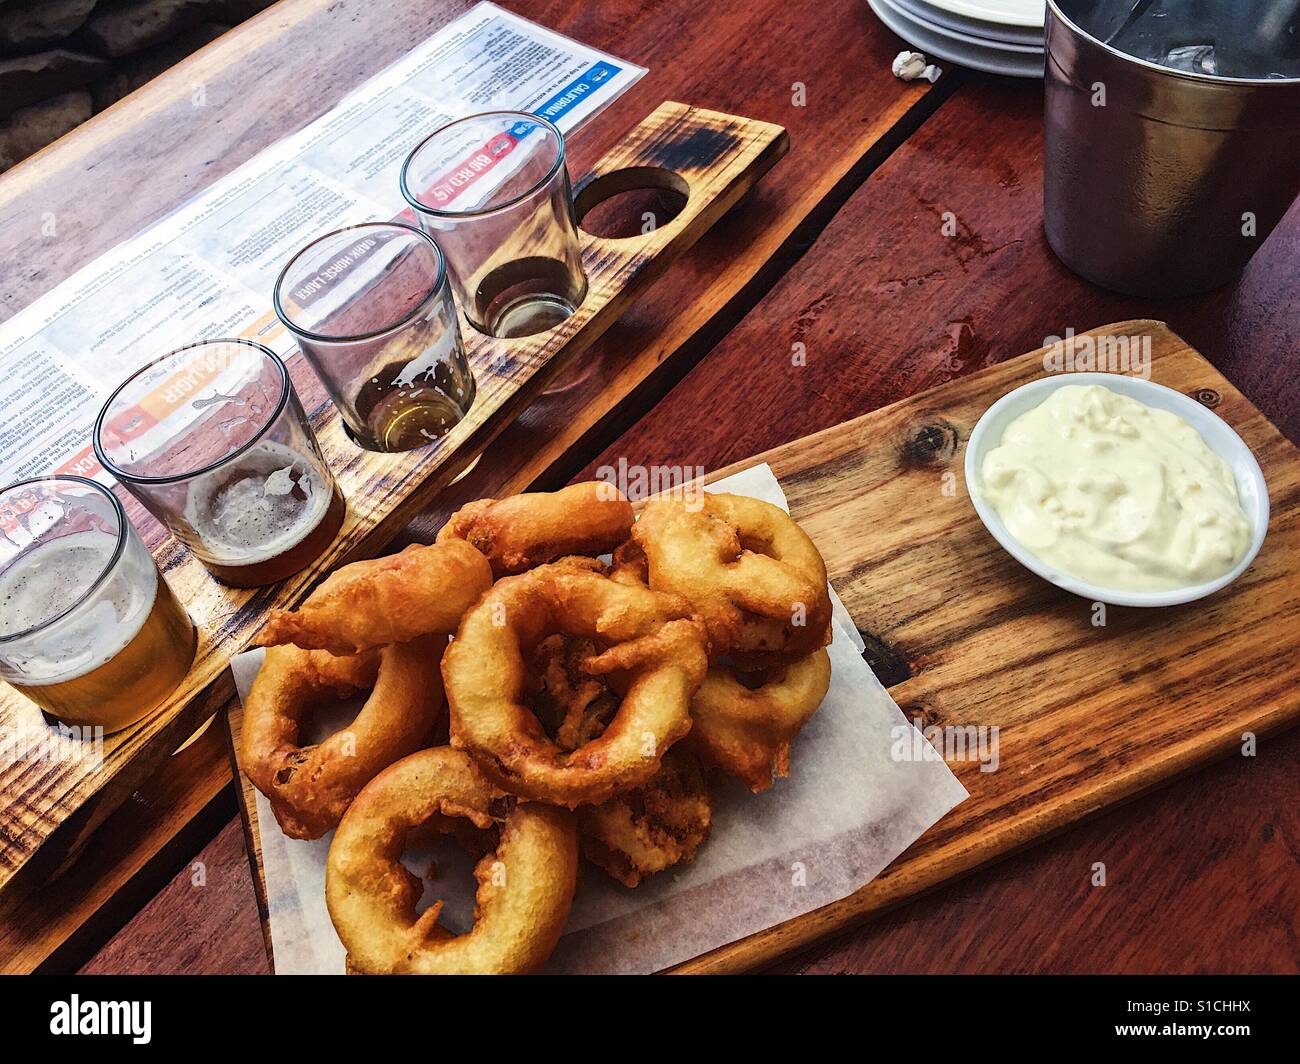 Onion rings and Craft Beer Stock Photo